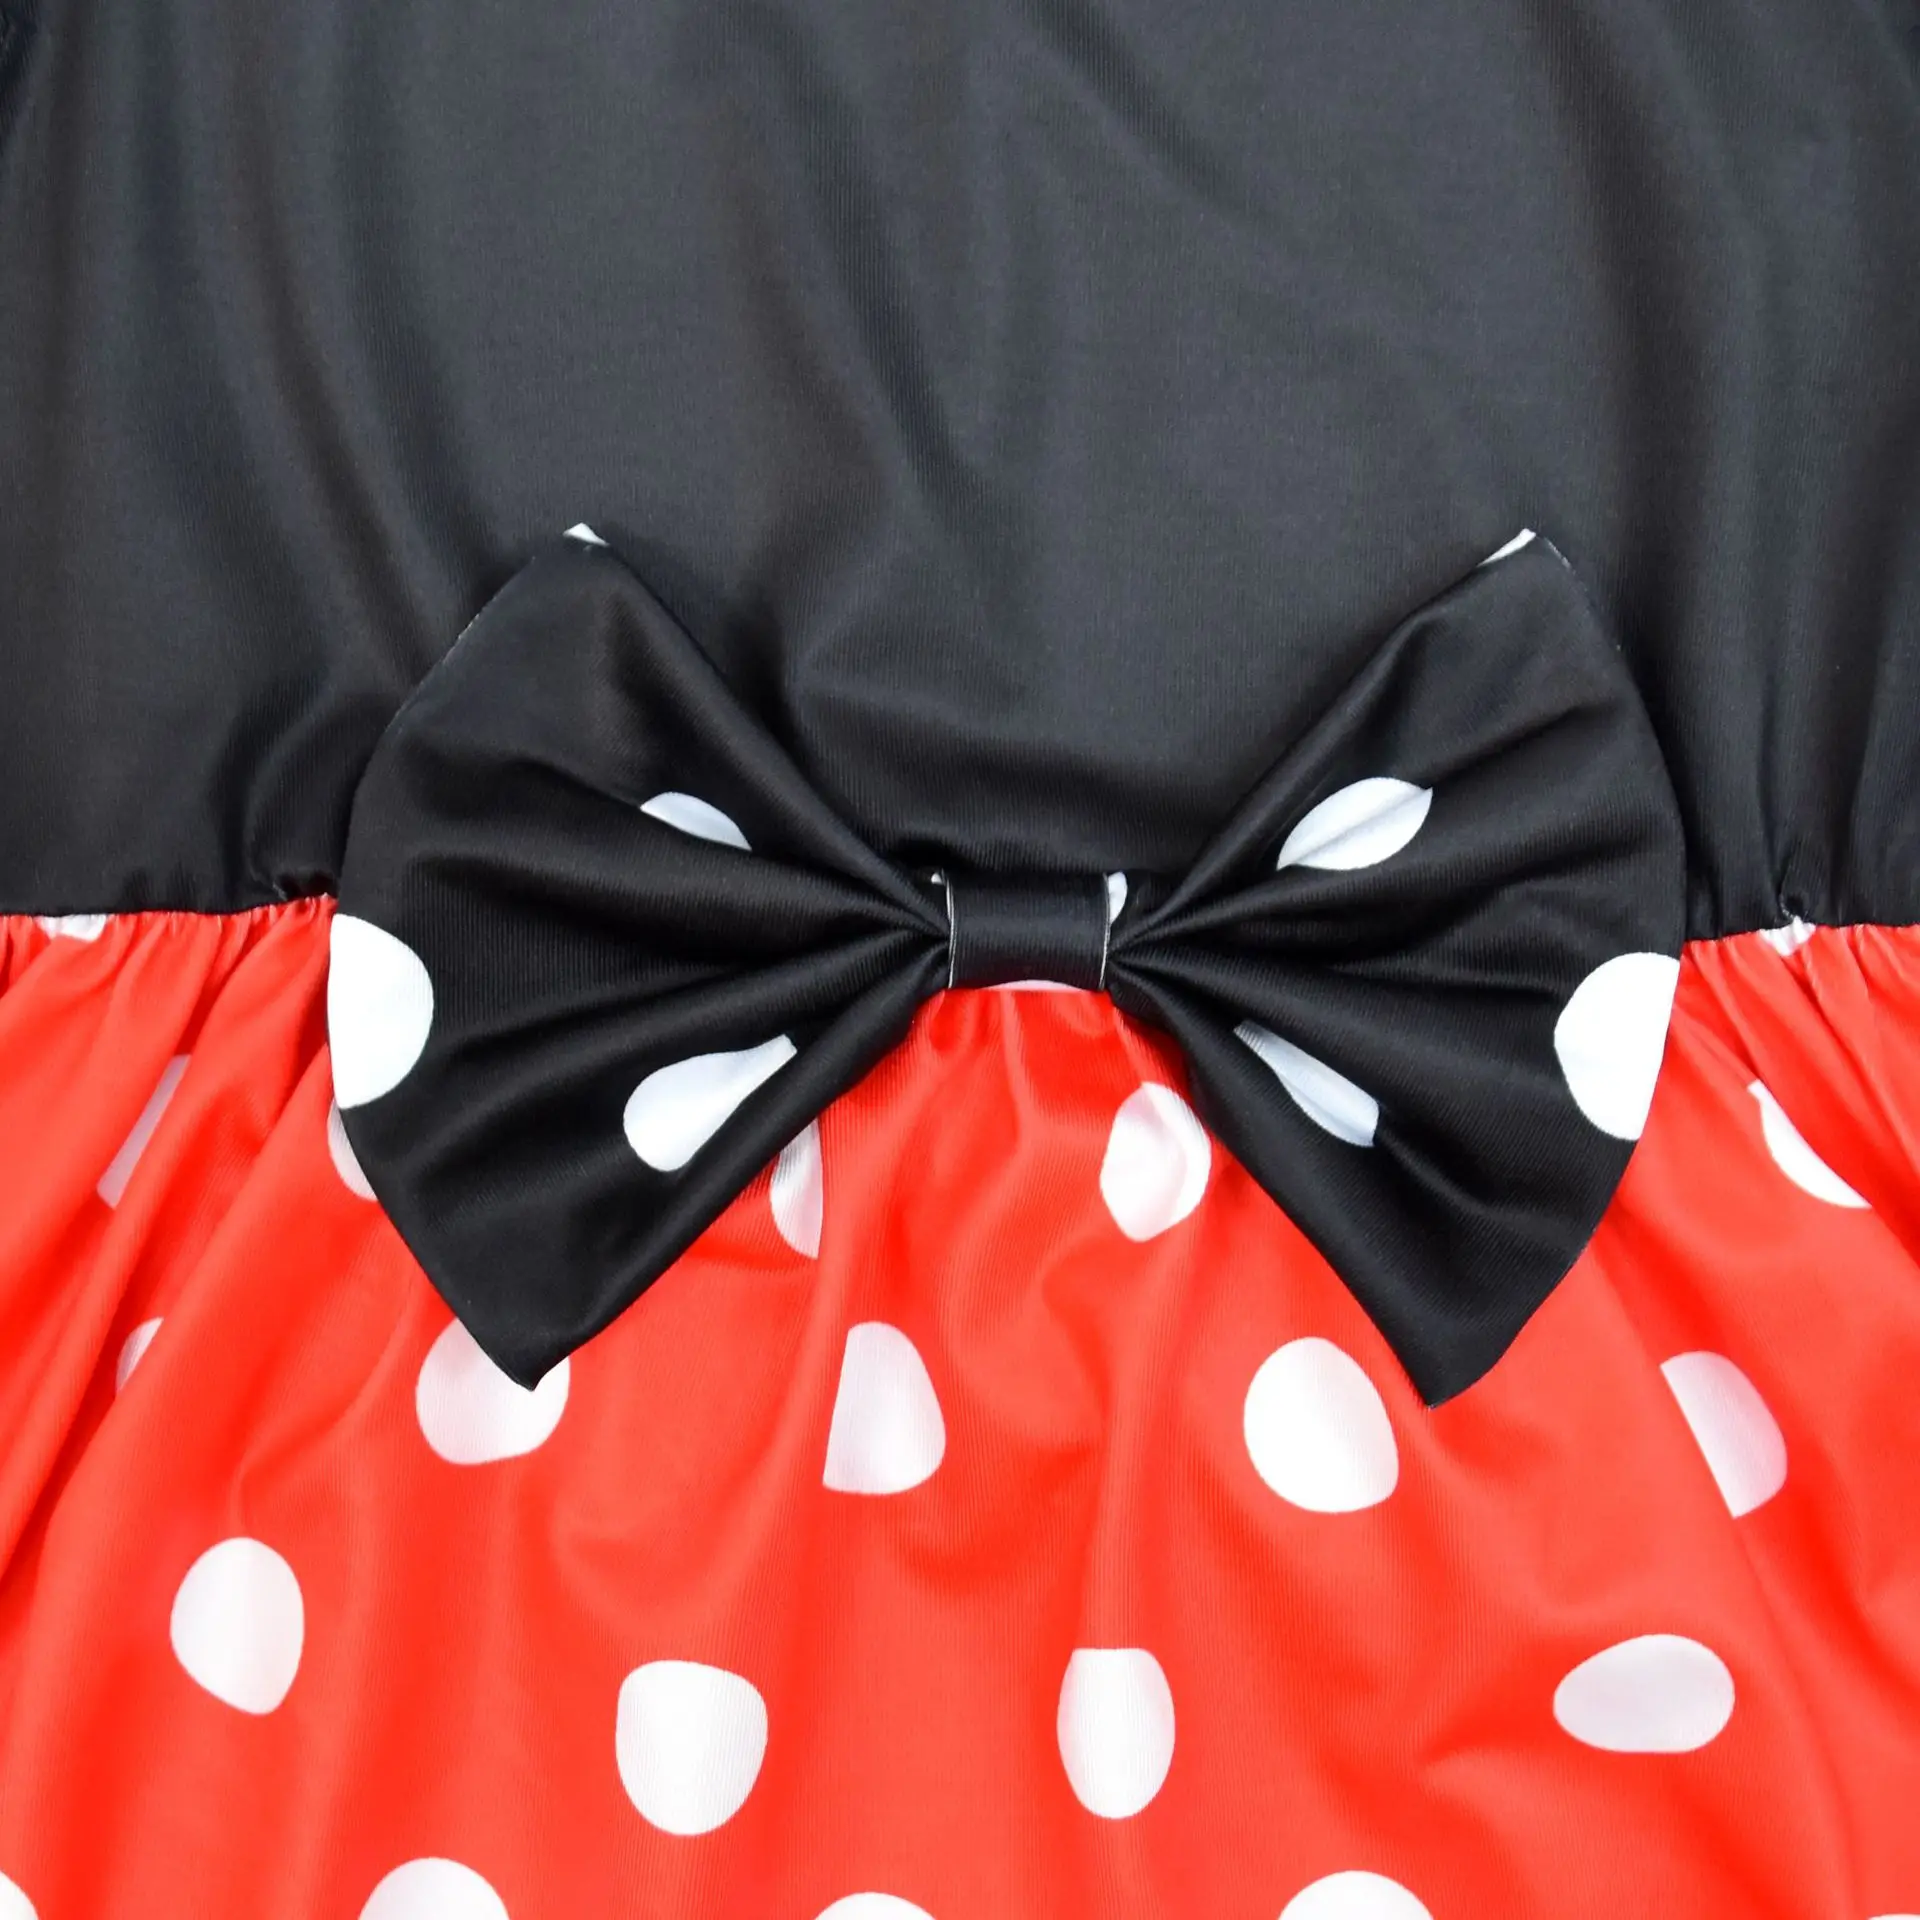 2023 Girls Minnie Mouse Dress Mickey Minnie Out Kids Costume Princess Dress Short Sleeve Infant Childrens Clothing with Headband